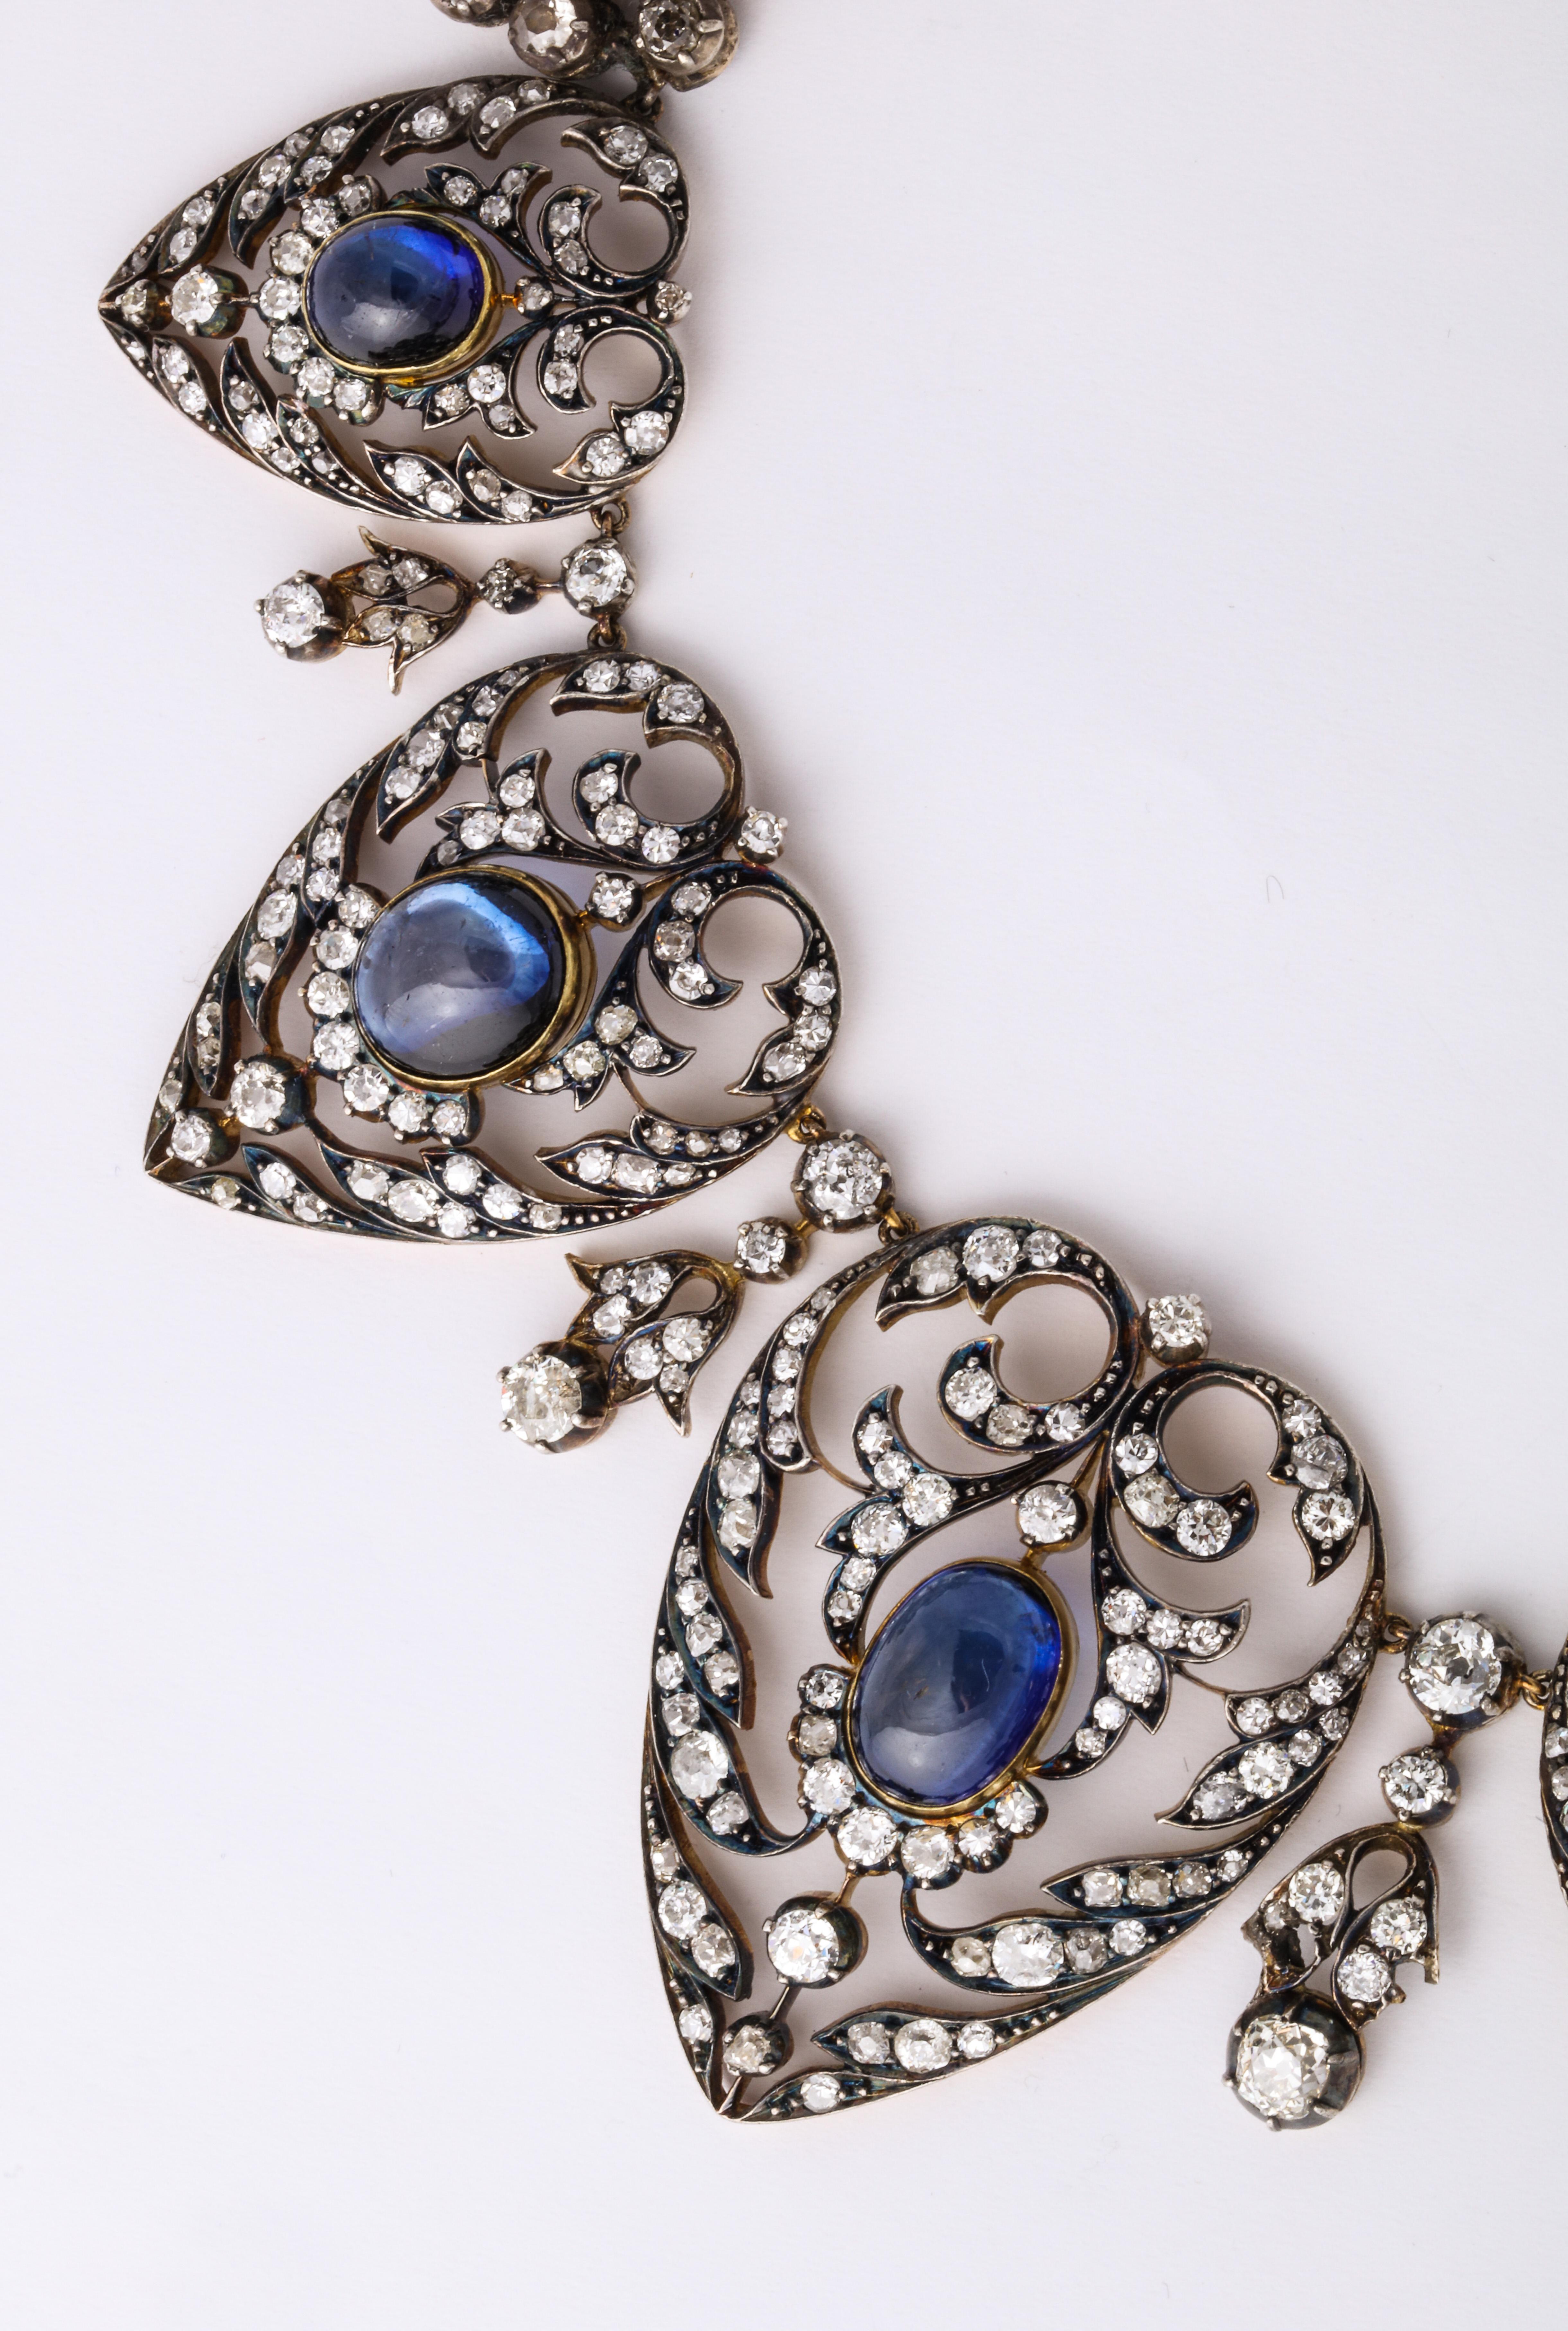 A one of a kind necklace from the late 1800s with cabochon sapphires of stunning quality surrounded by old mine diamonds.

Depicted in full page spread in the 